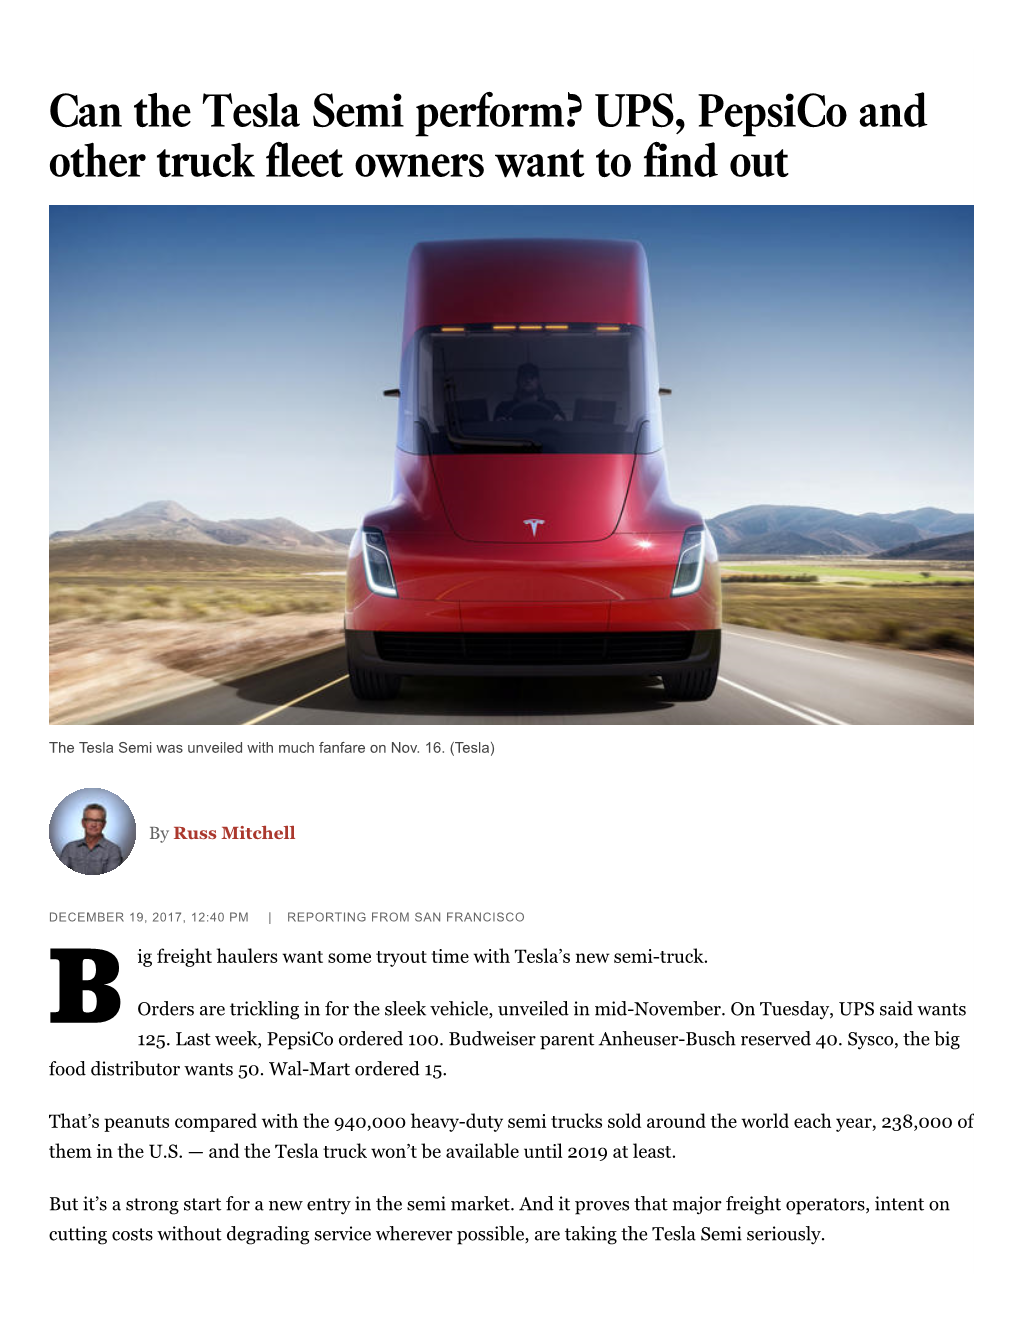 Can the Tesla Semi Perform? UPS, Pepsico and Other Truck Fleet Owners Want to Find Out